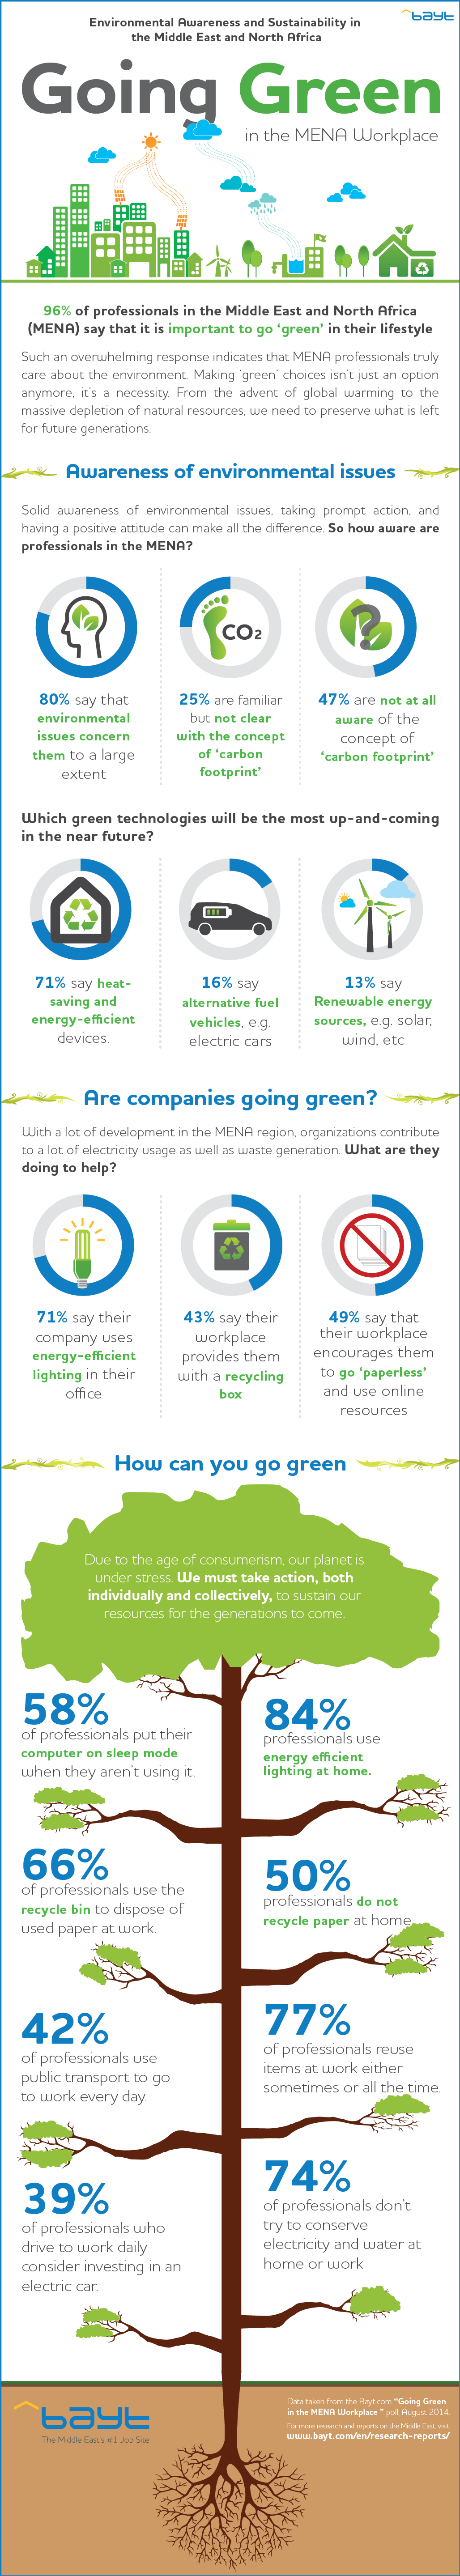 Going Green in the MENA Workplace